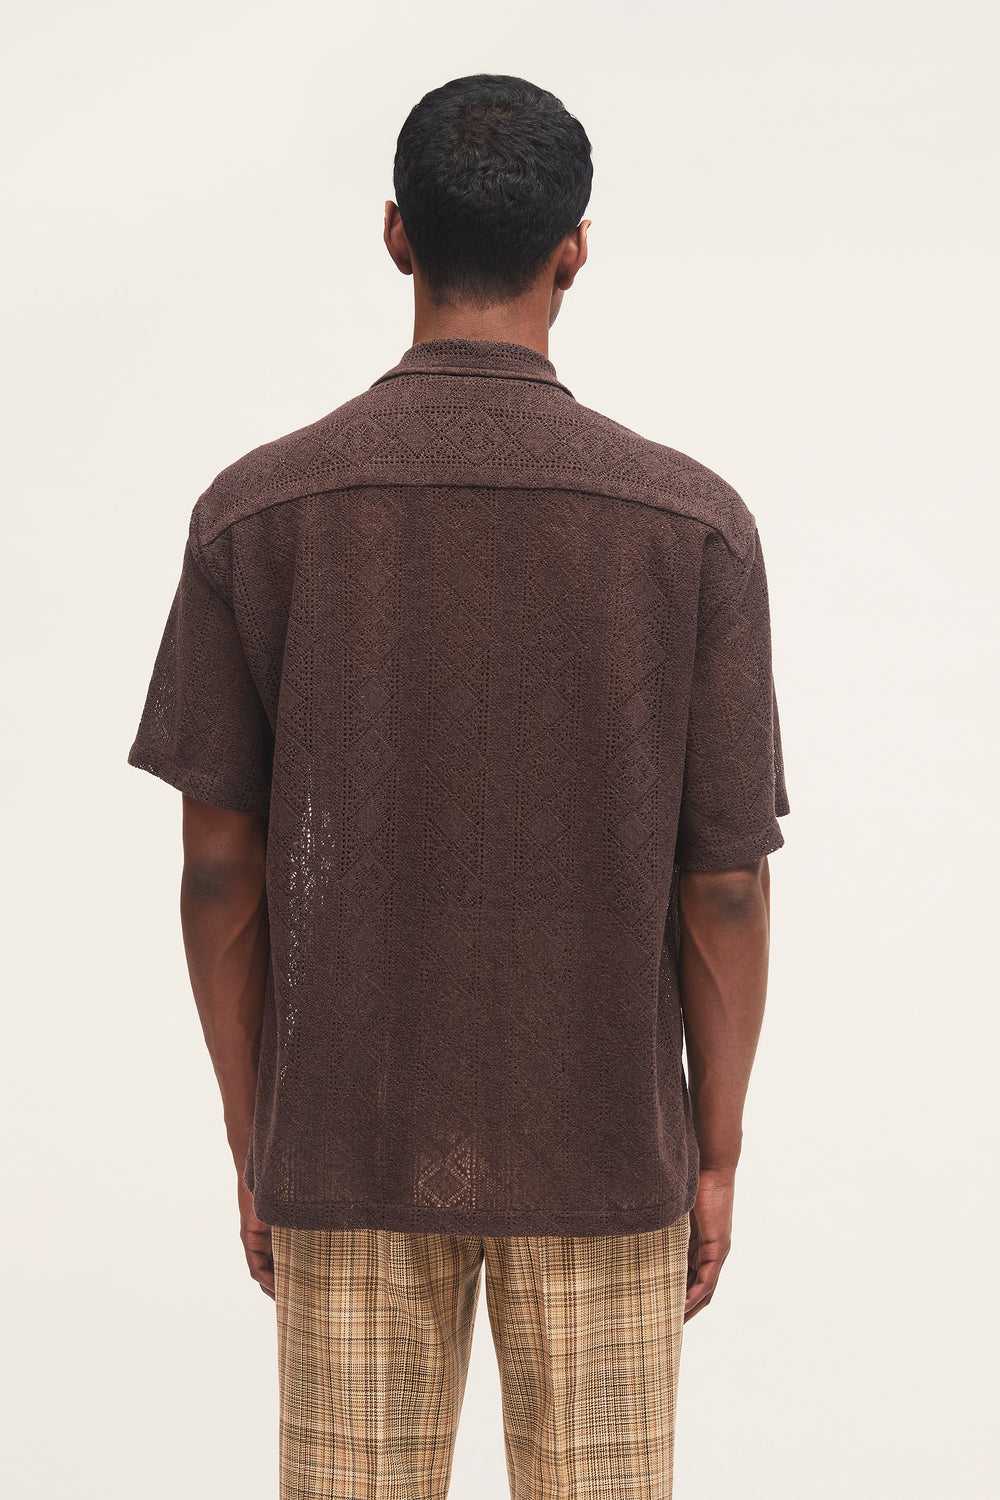 Ture Lace Shirt DK Brown